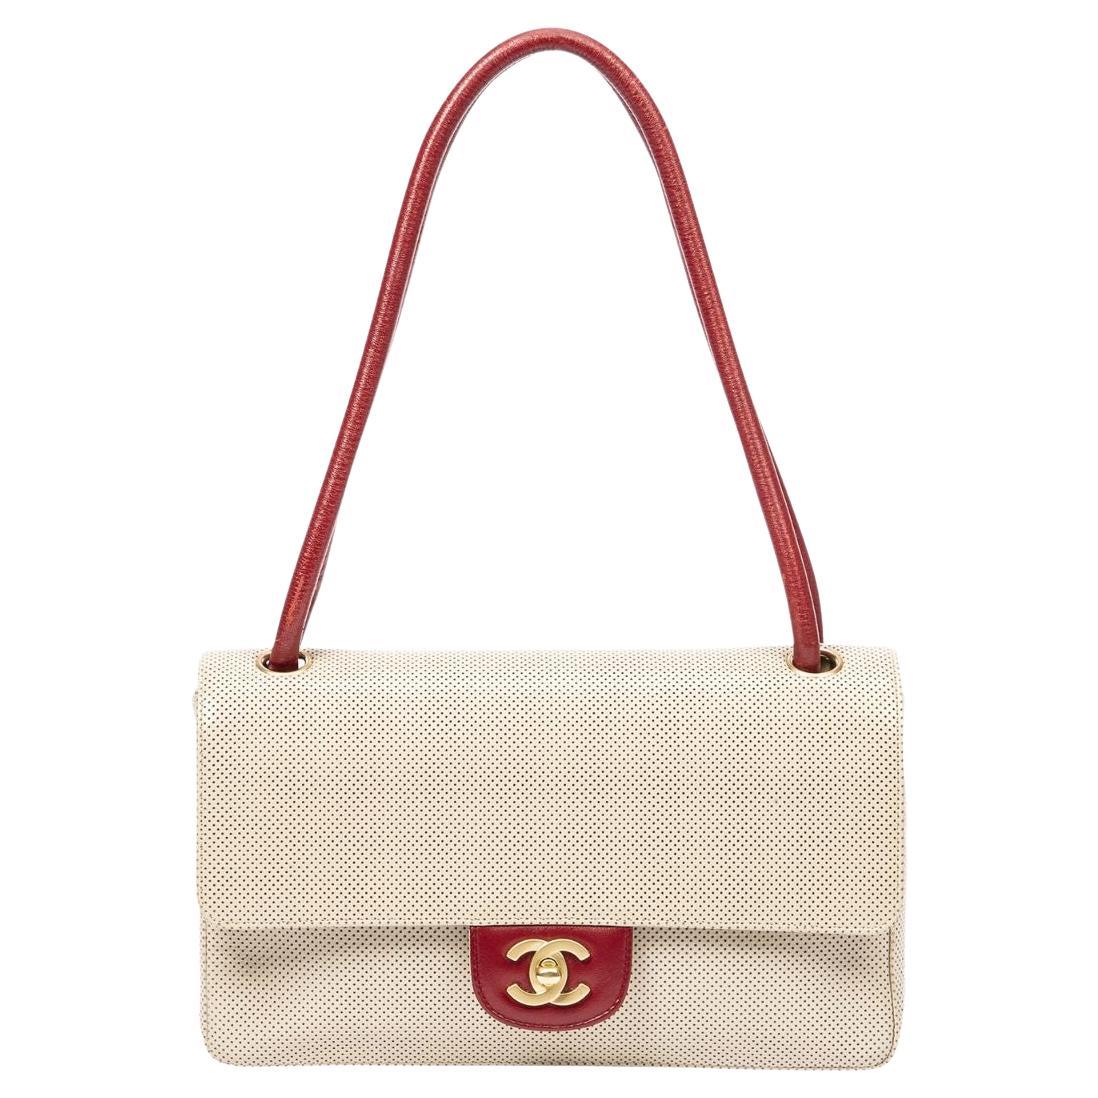 Chanel Beige/Red Perforated Leather CC Turnlock Flap Bag For Sale